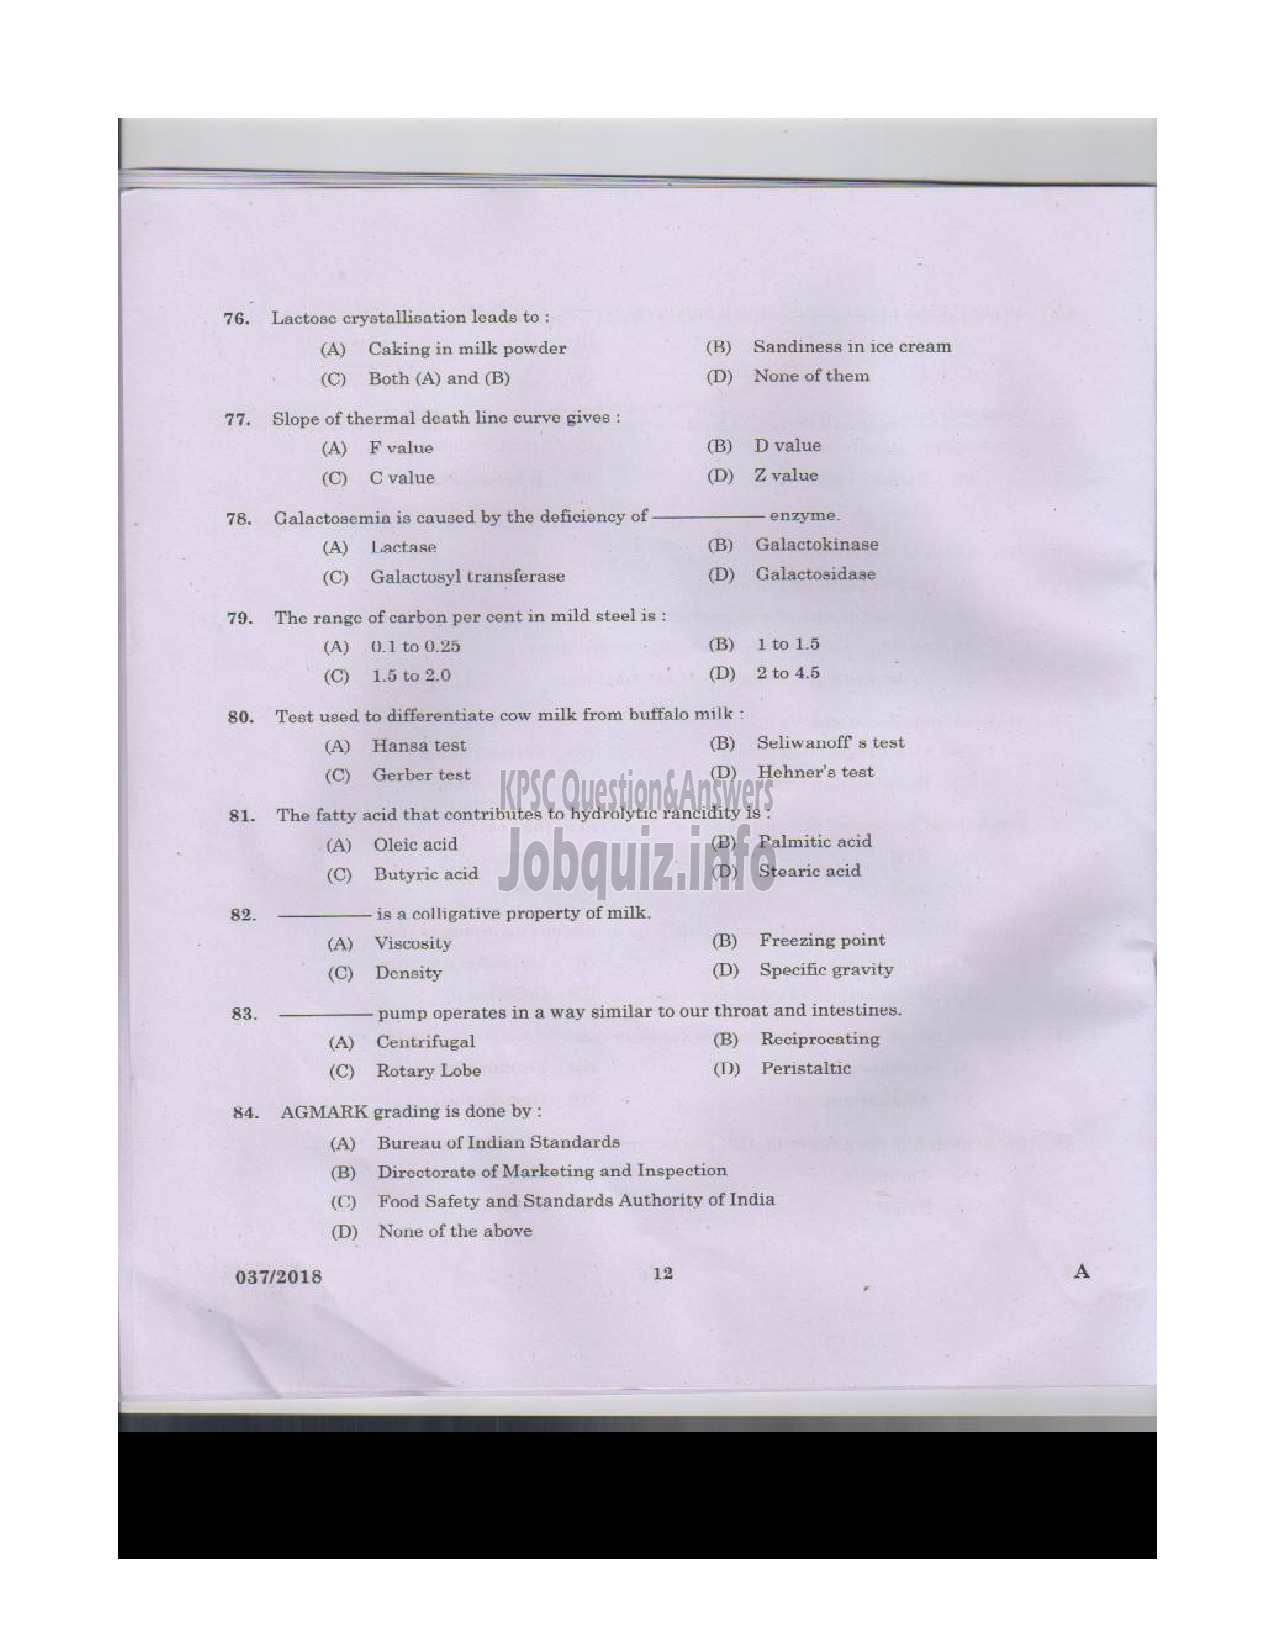 Kerala PSC Question Paper - VOCATIONAL INSTRUCTOR IN DAIRYING MILK PRODUCTS VOCATIONAL HIGHER SECONDARY EDUCATION-11